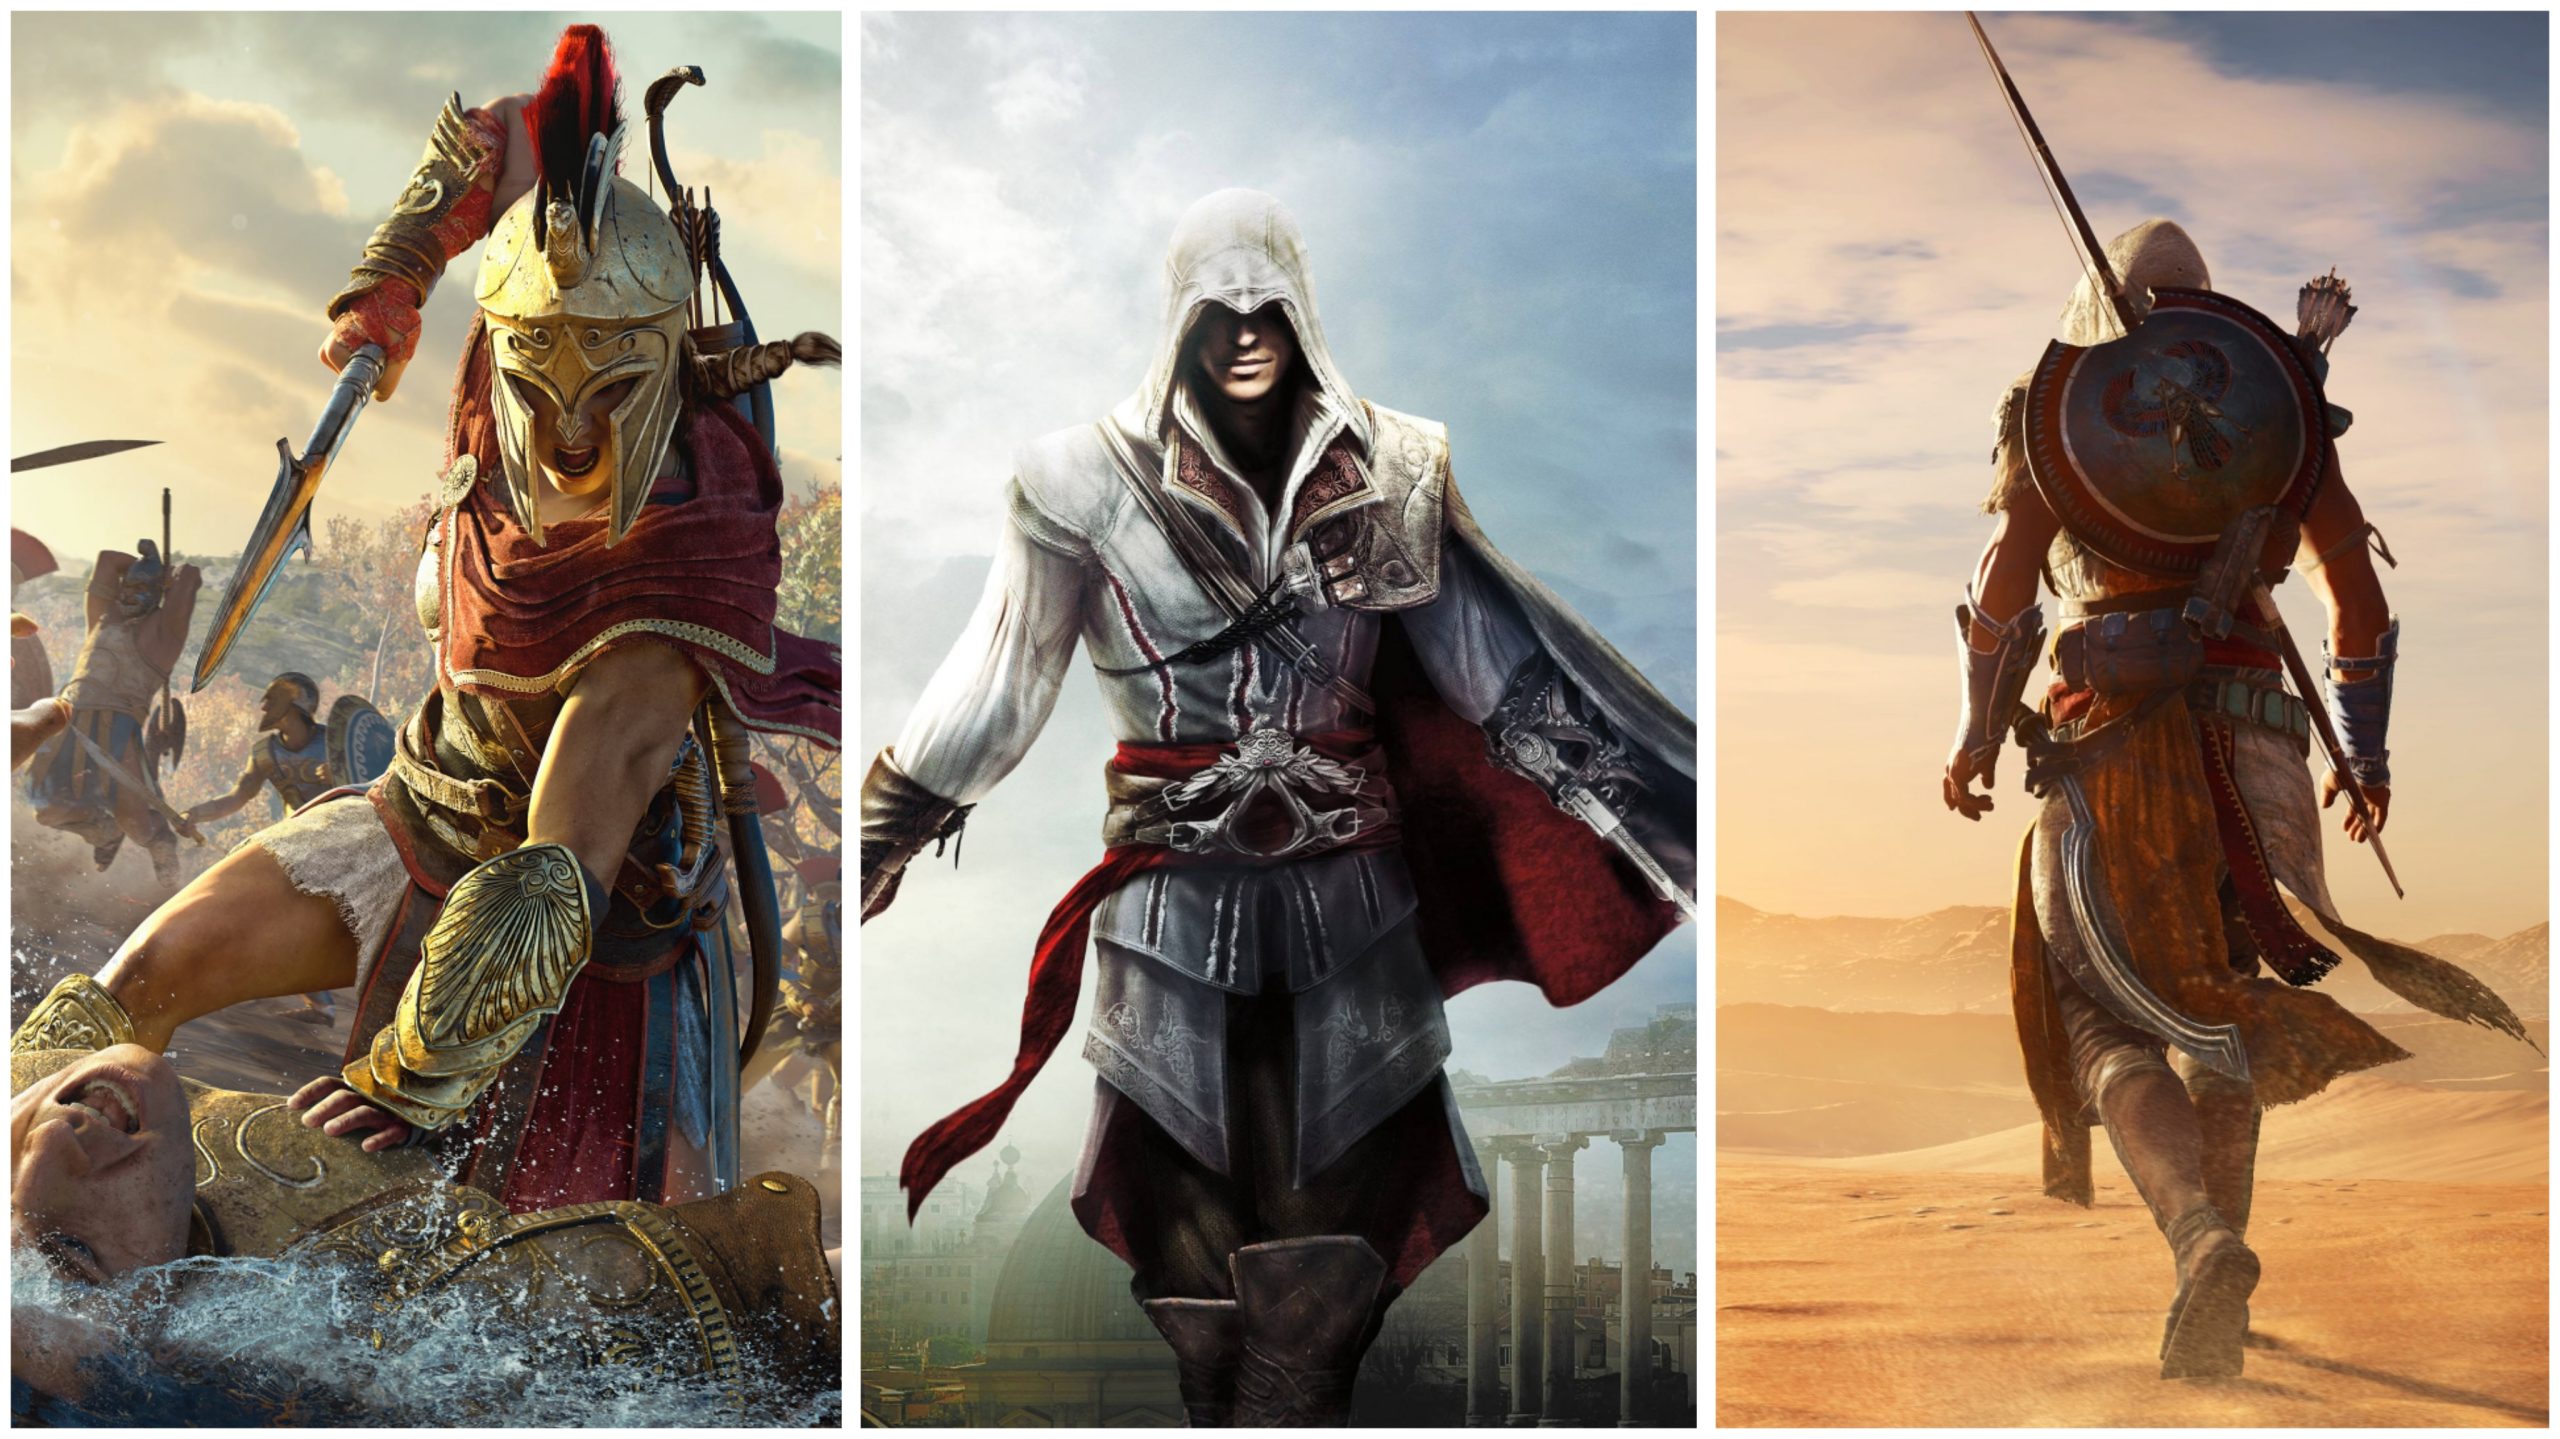 Assassin's Creed Revelations was the peak of the series, fans agree